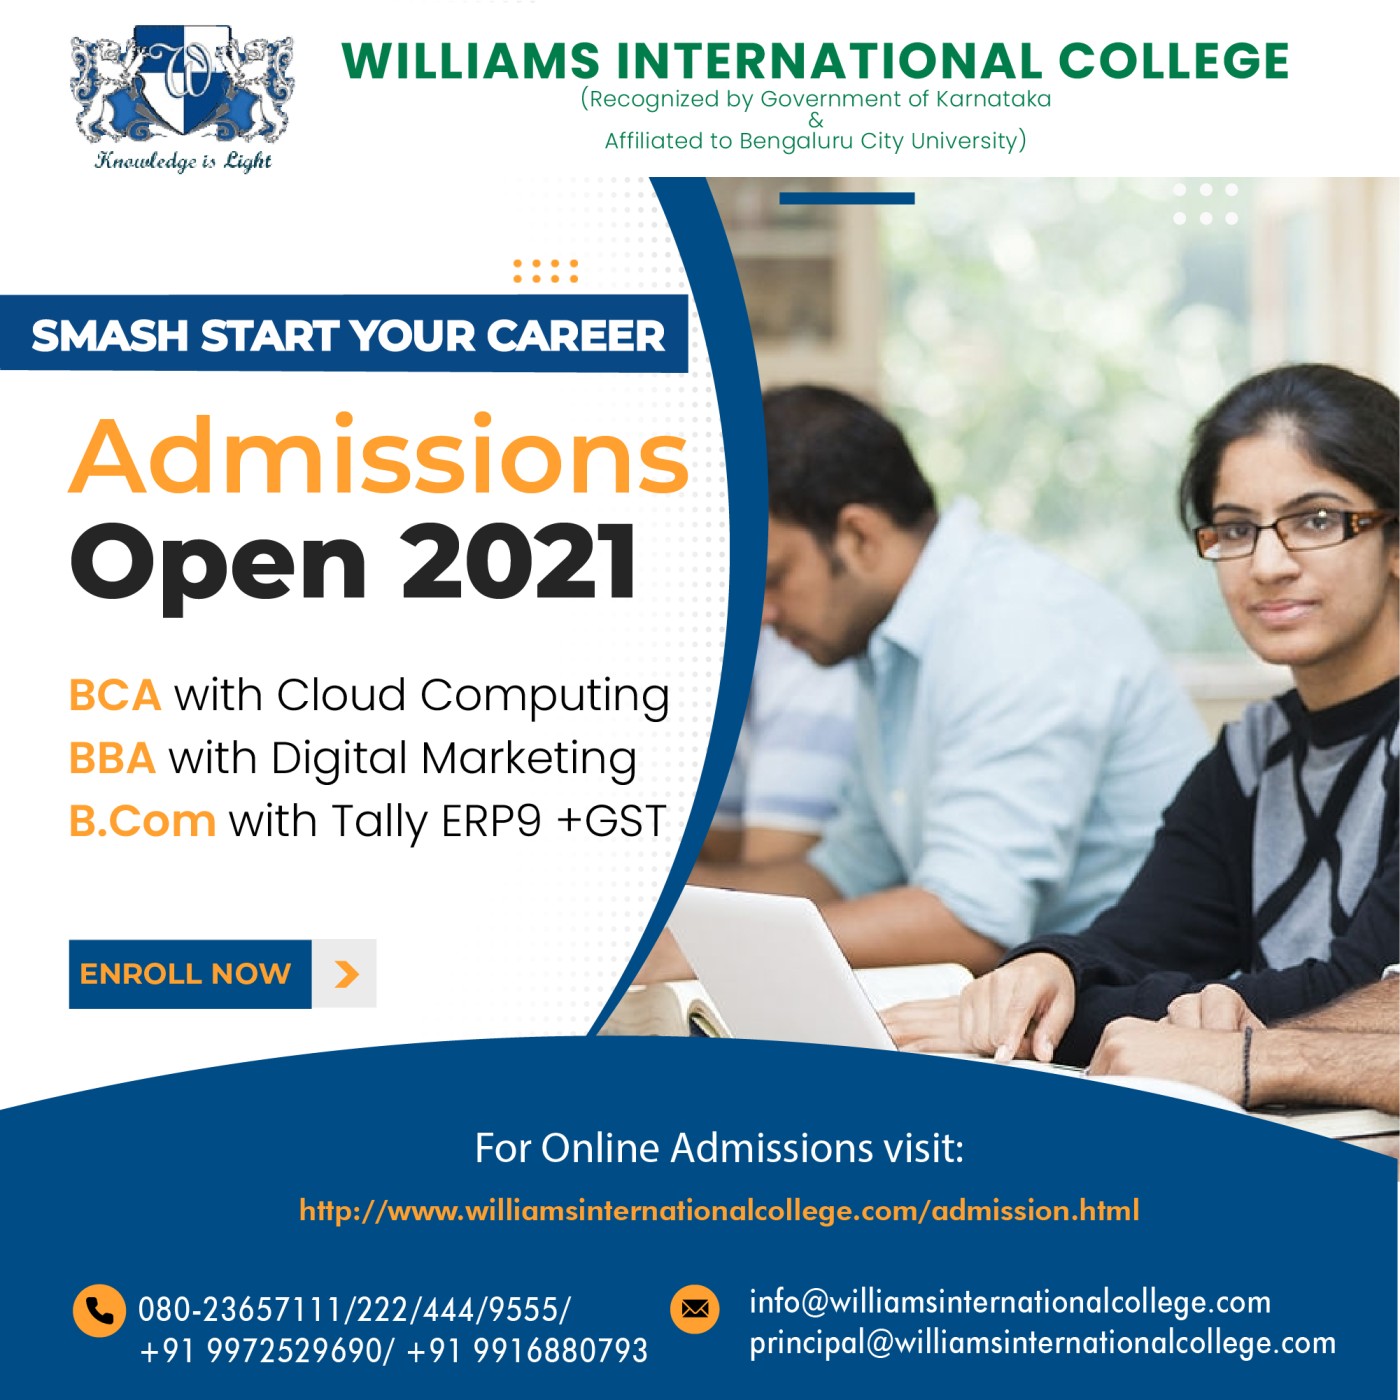 Top college in rt Nagar Bangalore | Williams international collegeEducation and LearningDistance Learning CoursesAll Indiaother